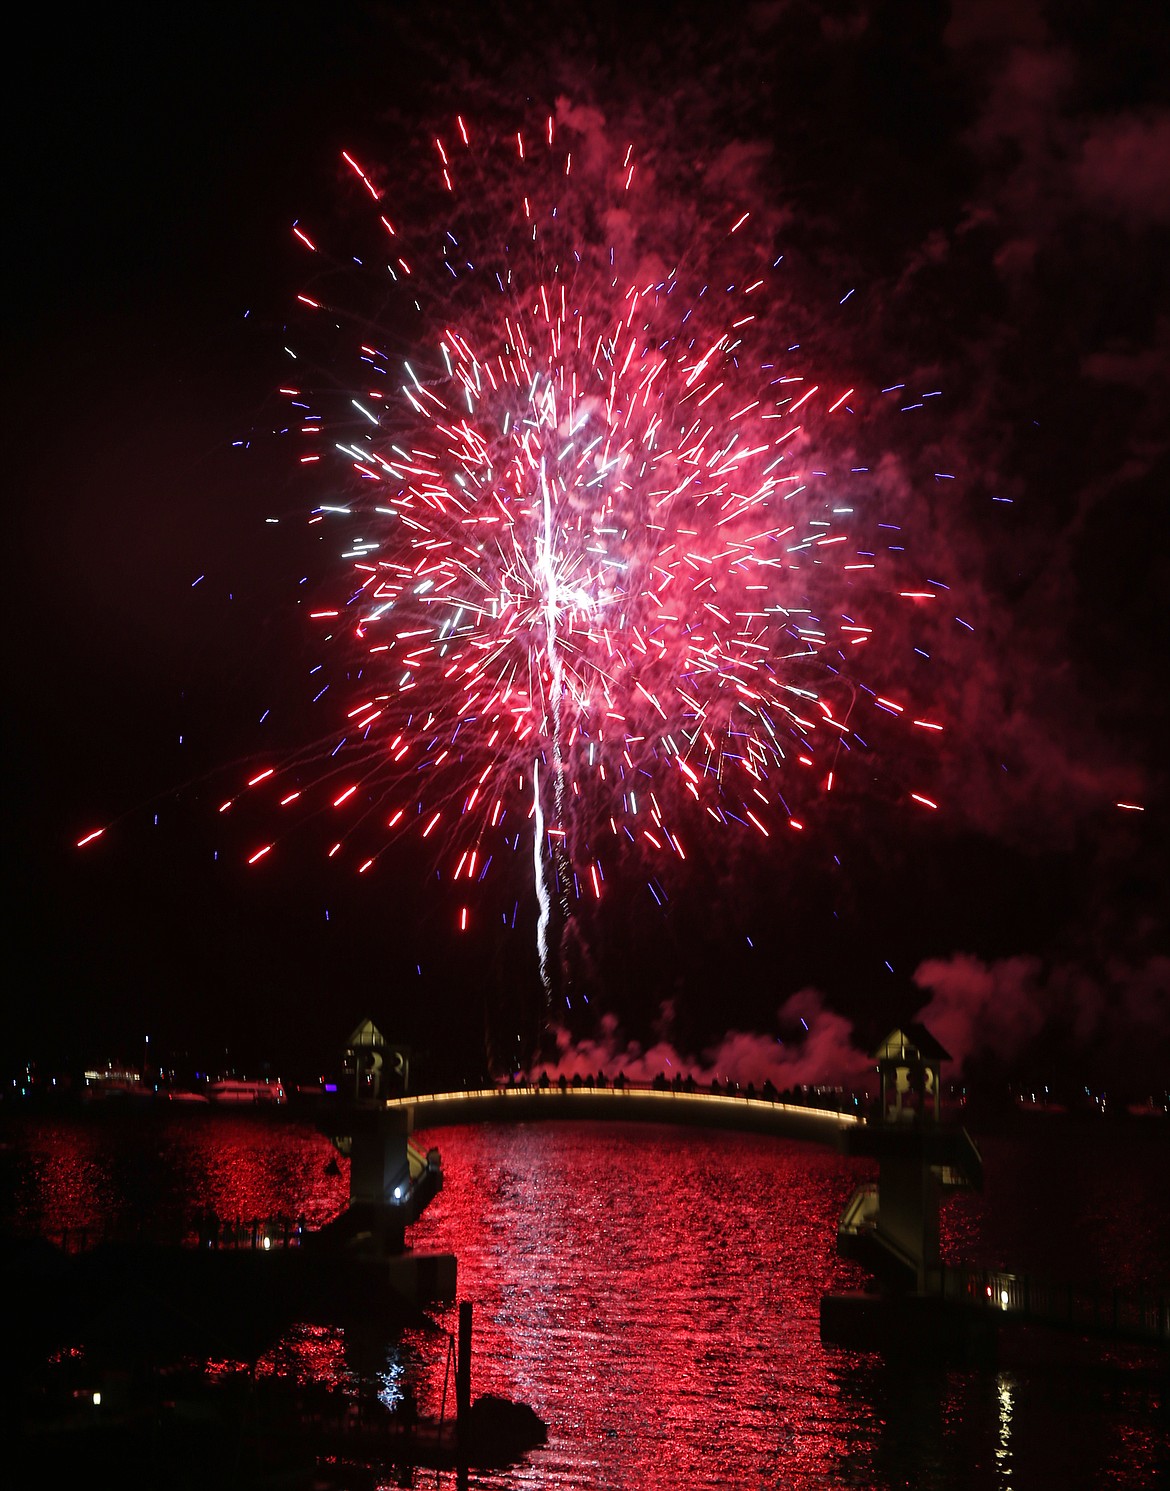 Red and blue fireworks explode over Lake Coeur d’Alene during the Fourth of July celebration.